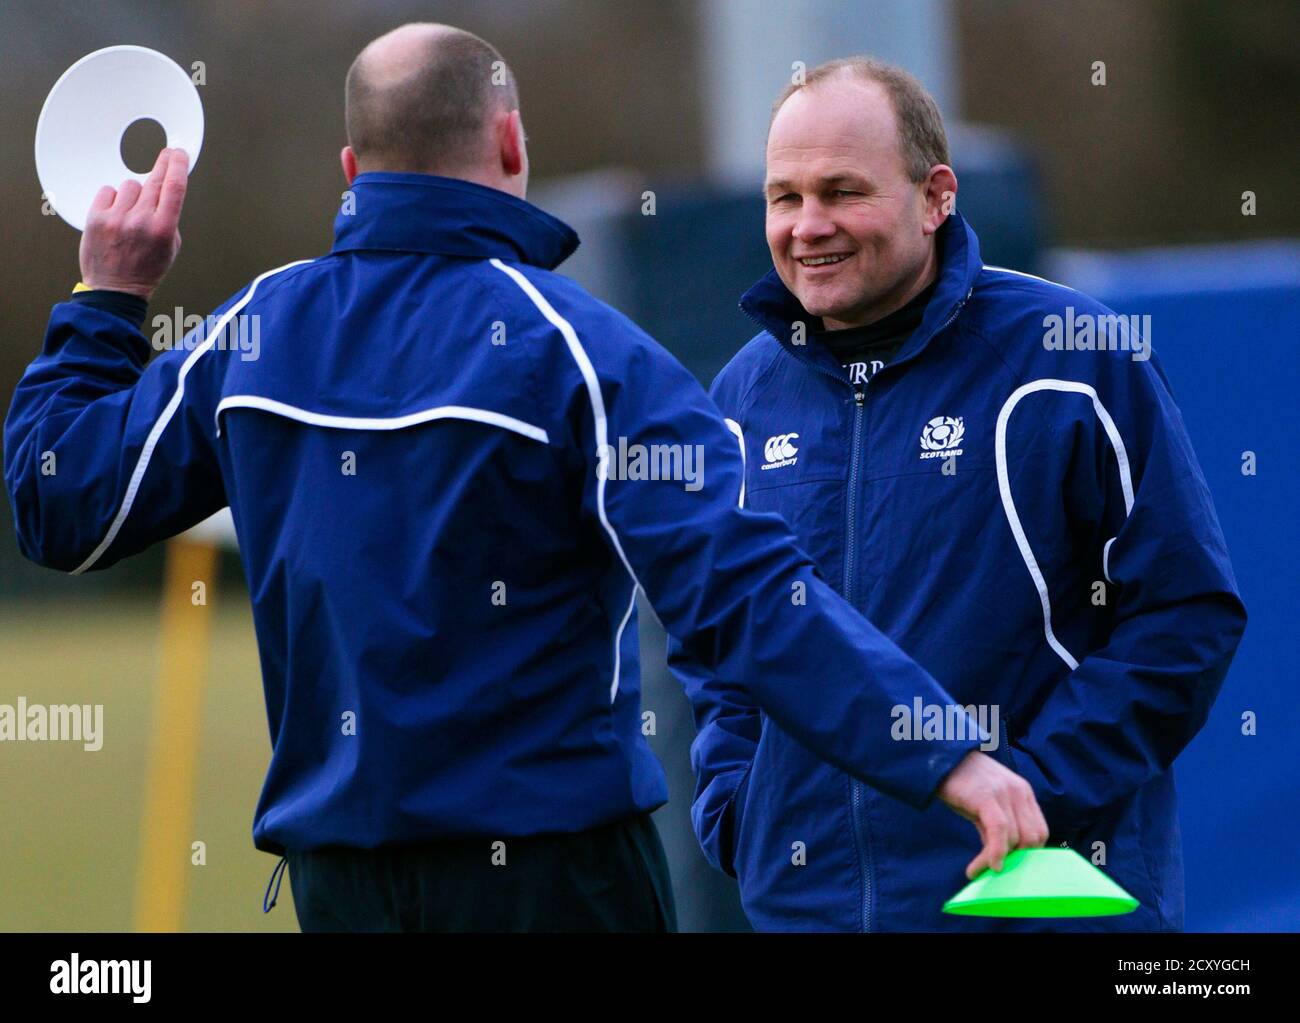 Scotland Rugby Union Coach Andy High Resolution Stock Photography and  Images - Alamy